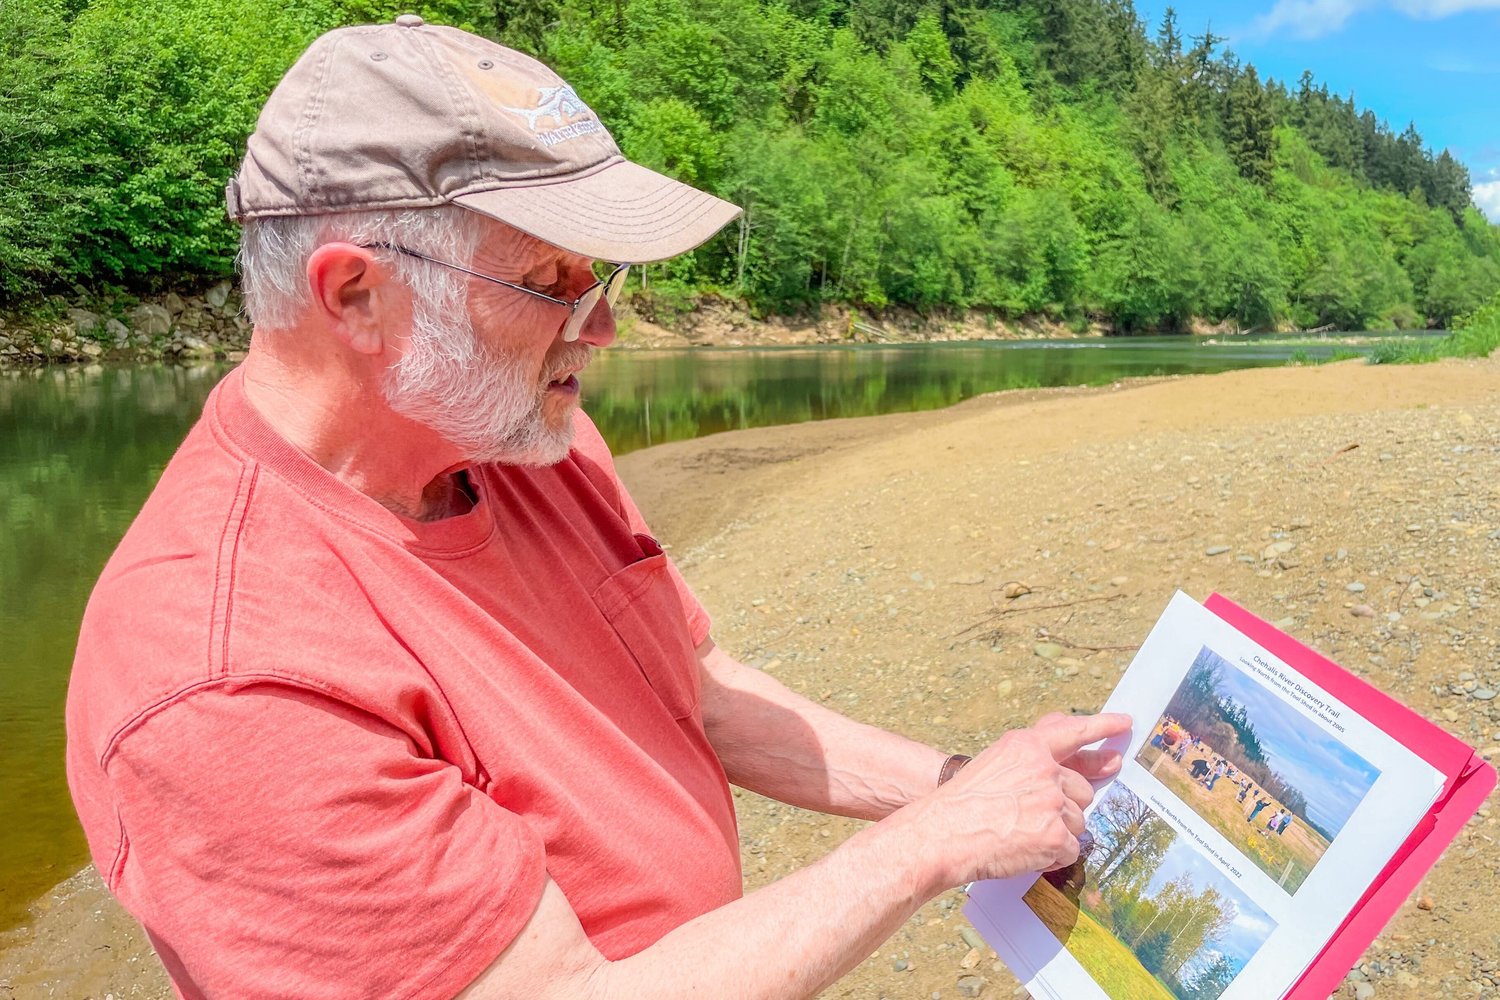 Don Watt, secretary with the Chehalis River Basin Land Trust, points out photos from youth projects inside the Centralia Discovery Park.